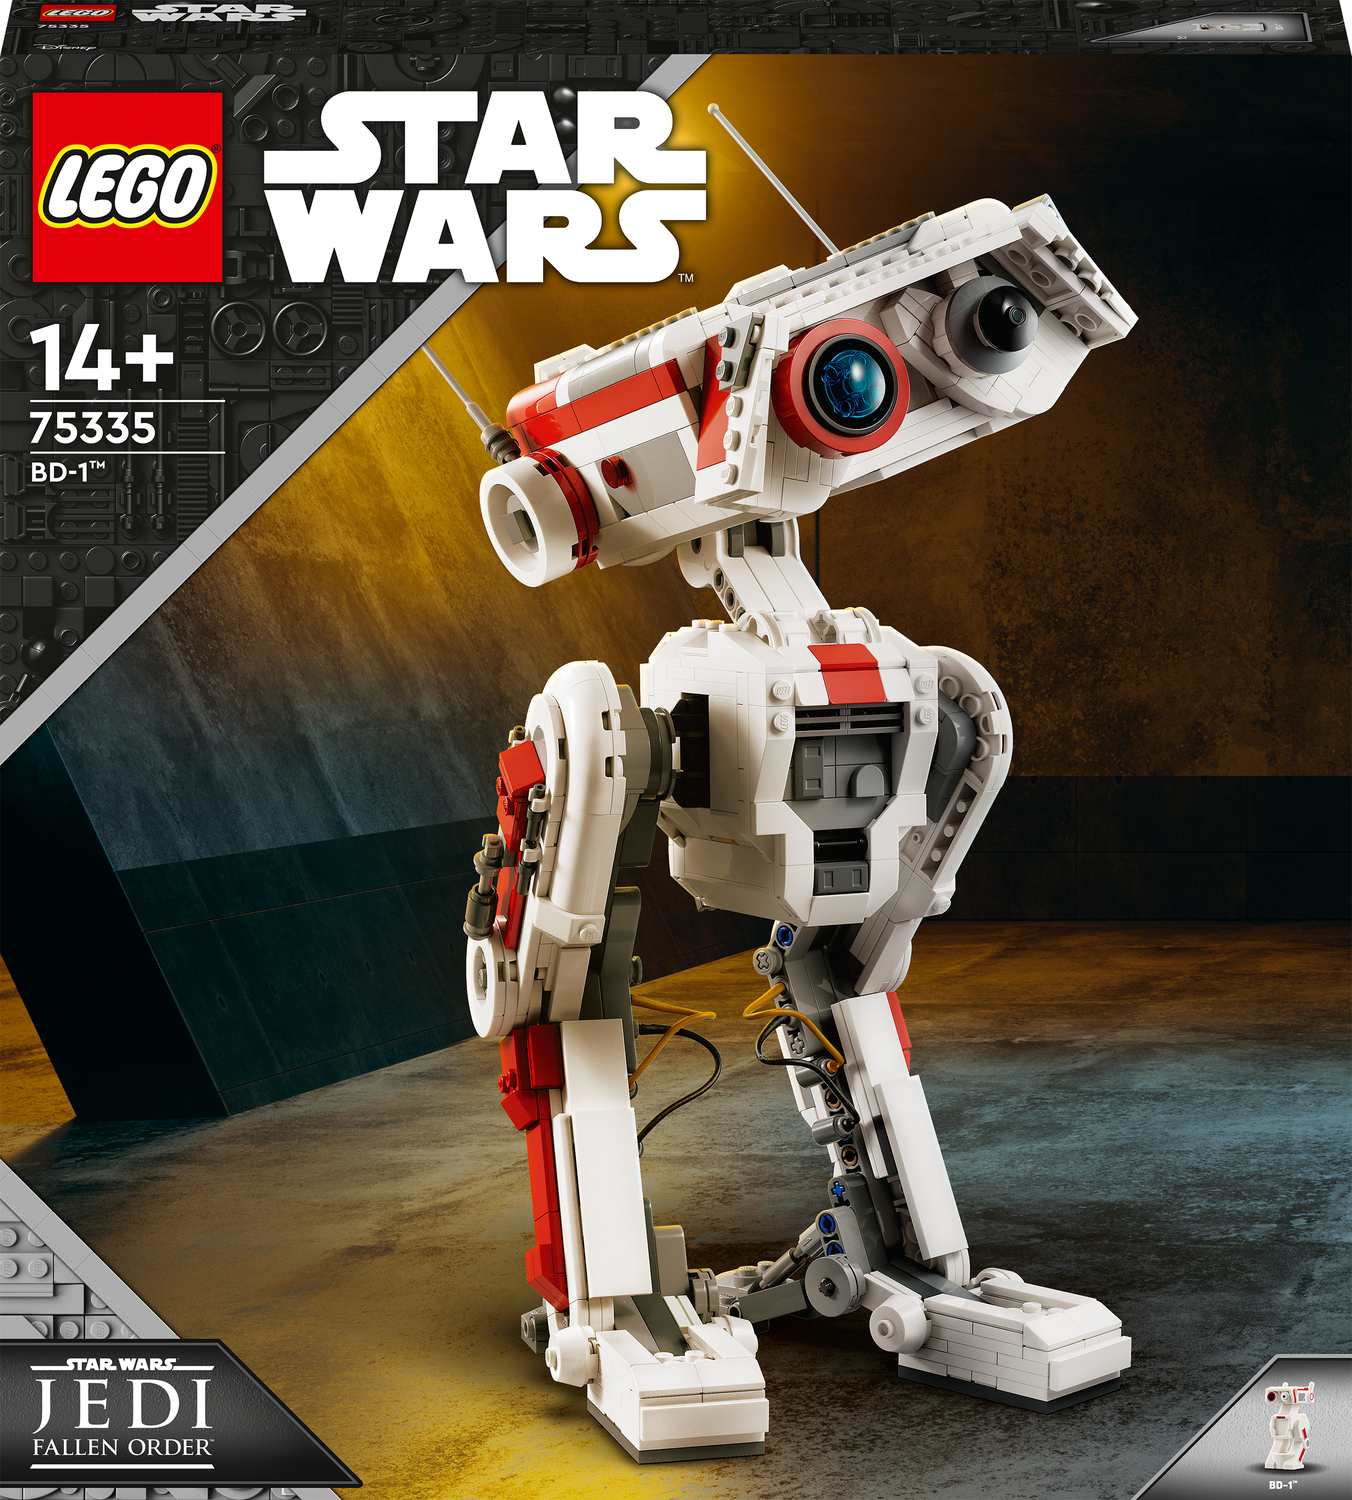 Lego Star Wars Set with Imperial Star Destroyer Featuring Cal Kestis Minifigure Revealed